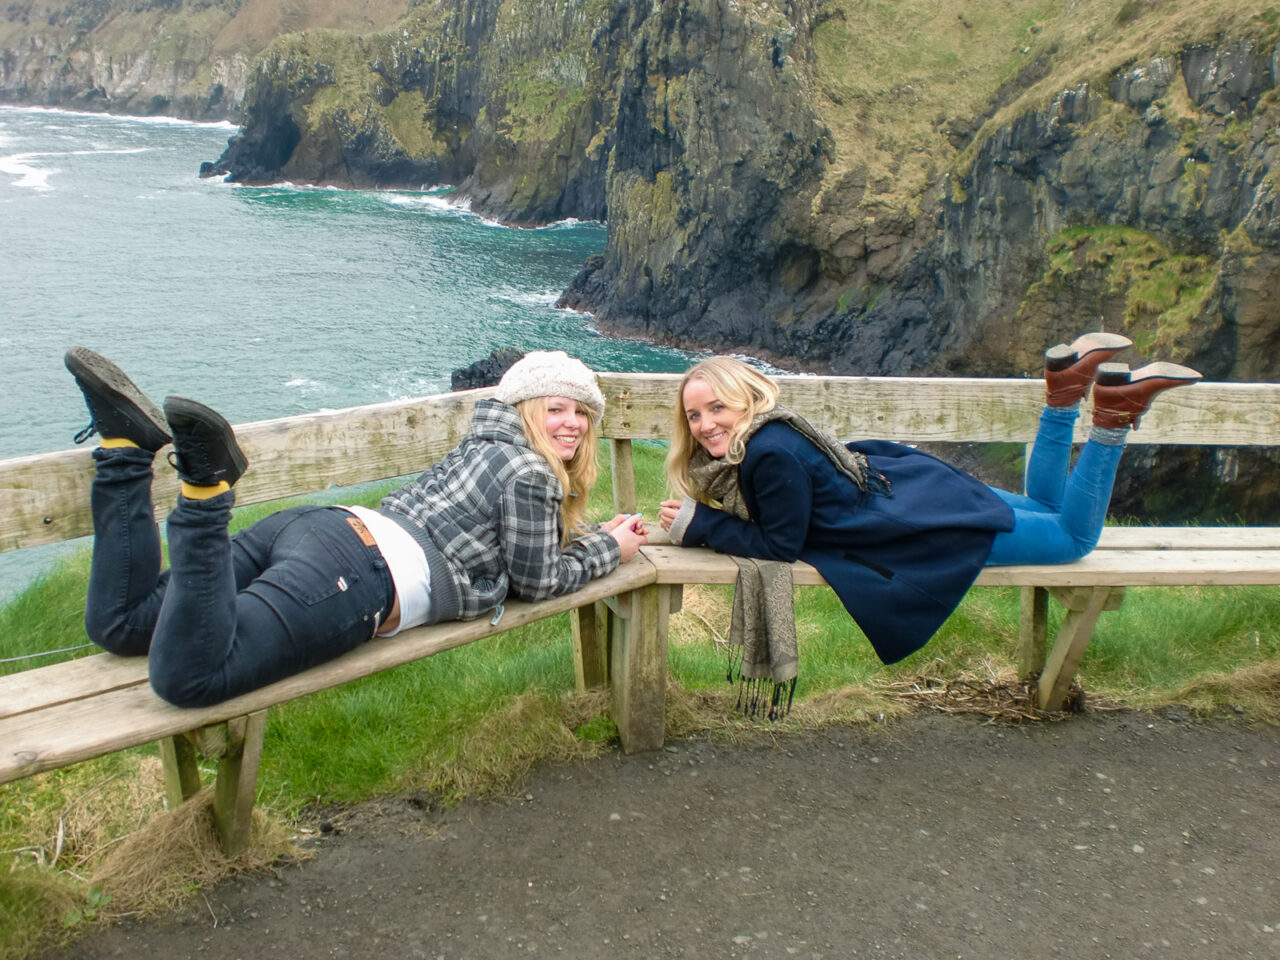 Posing on a bench near Cliffs of Moher